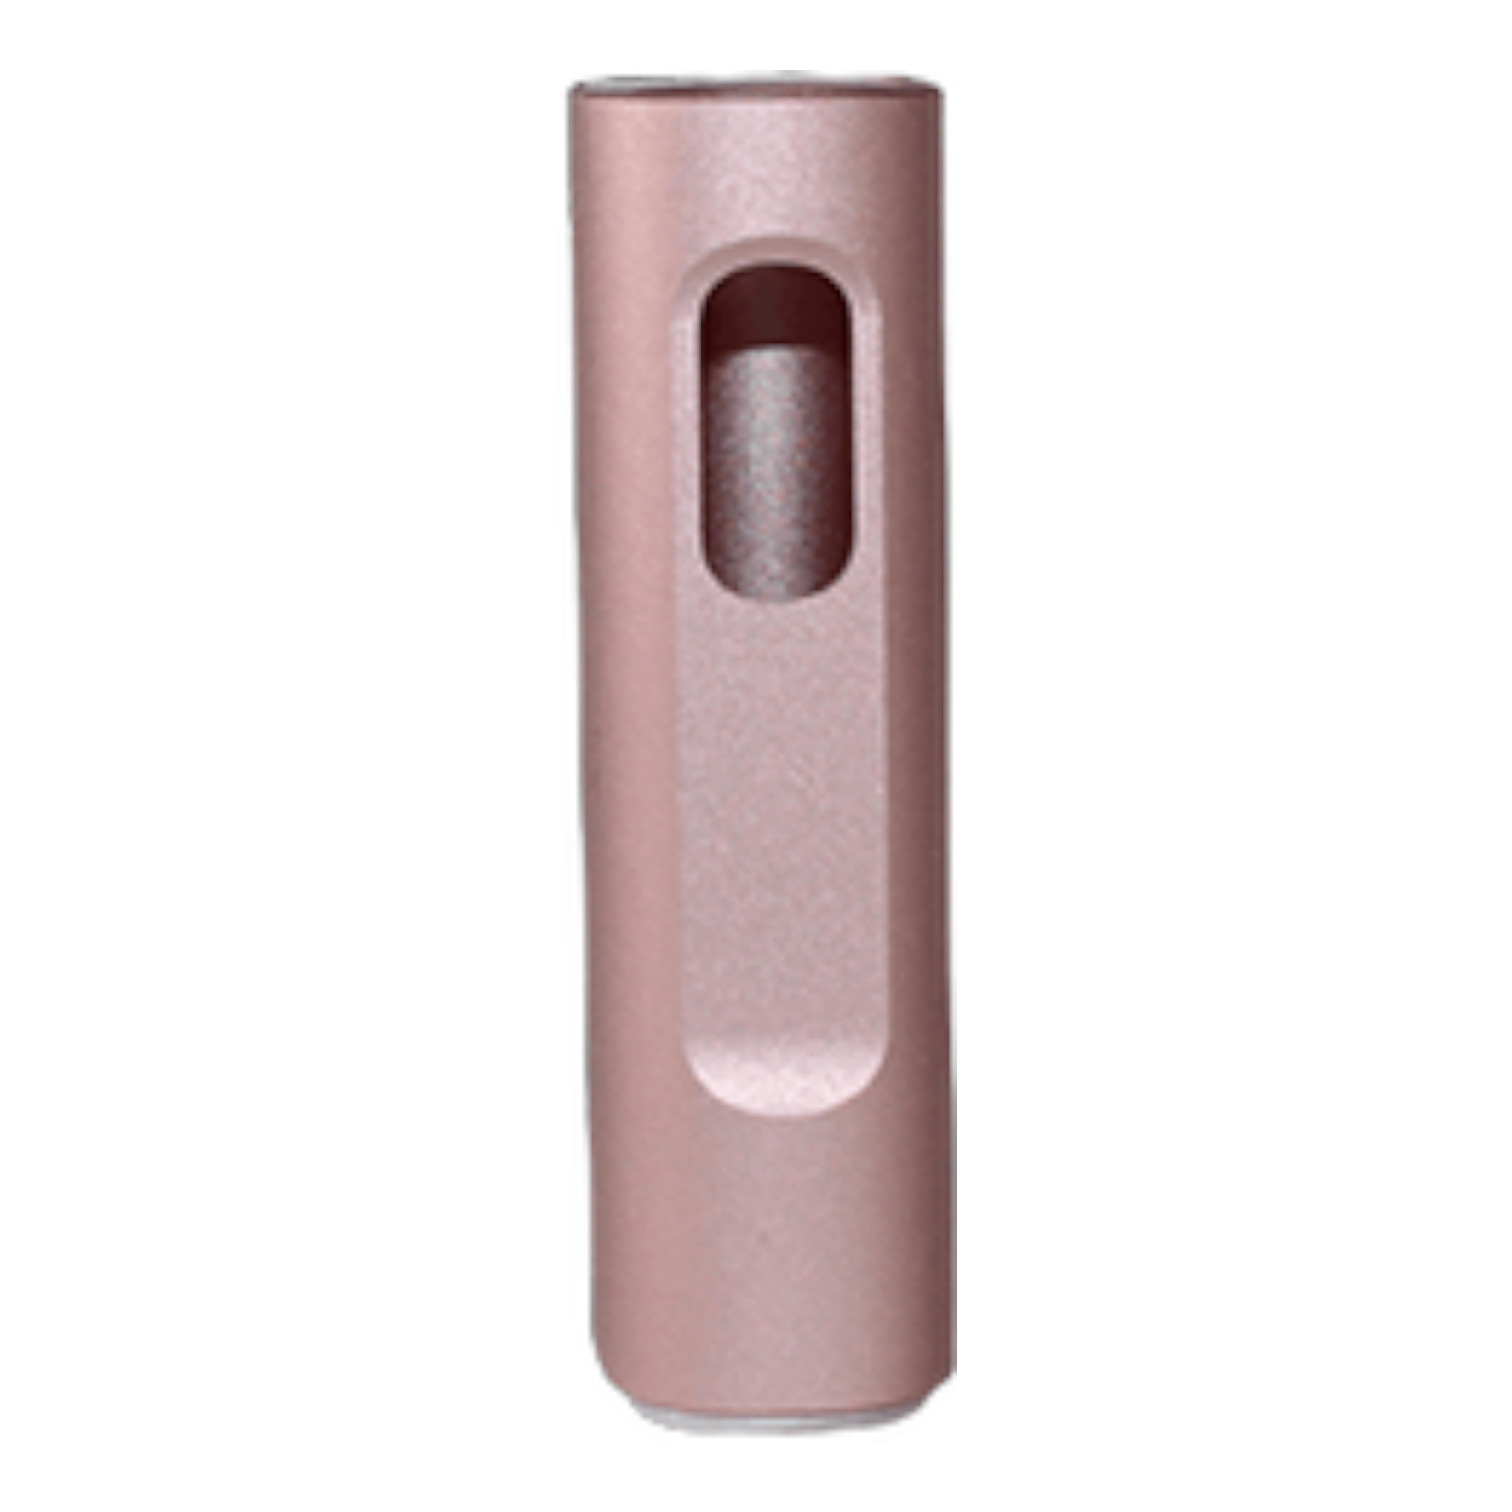 CCELL - Silo Battery - Pink